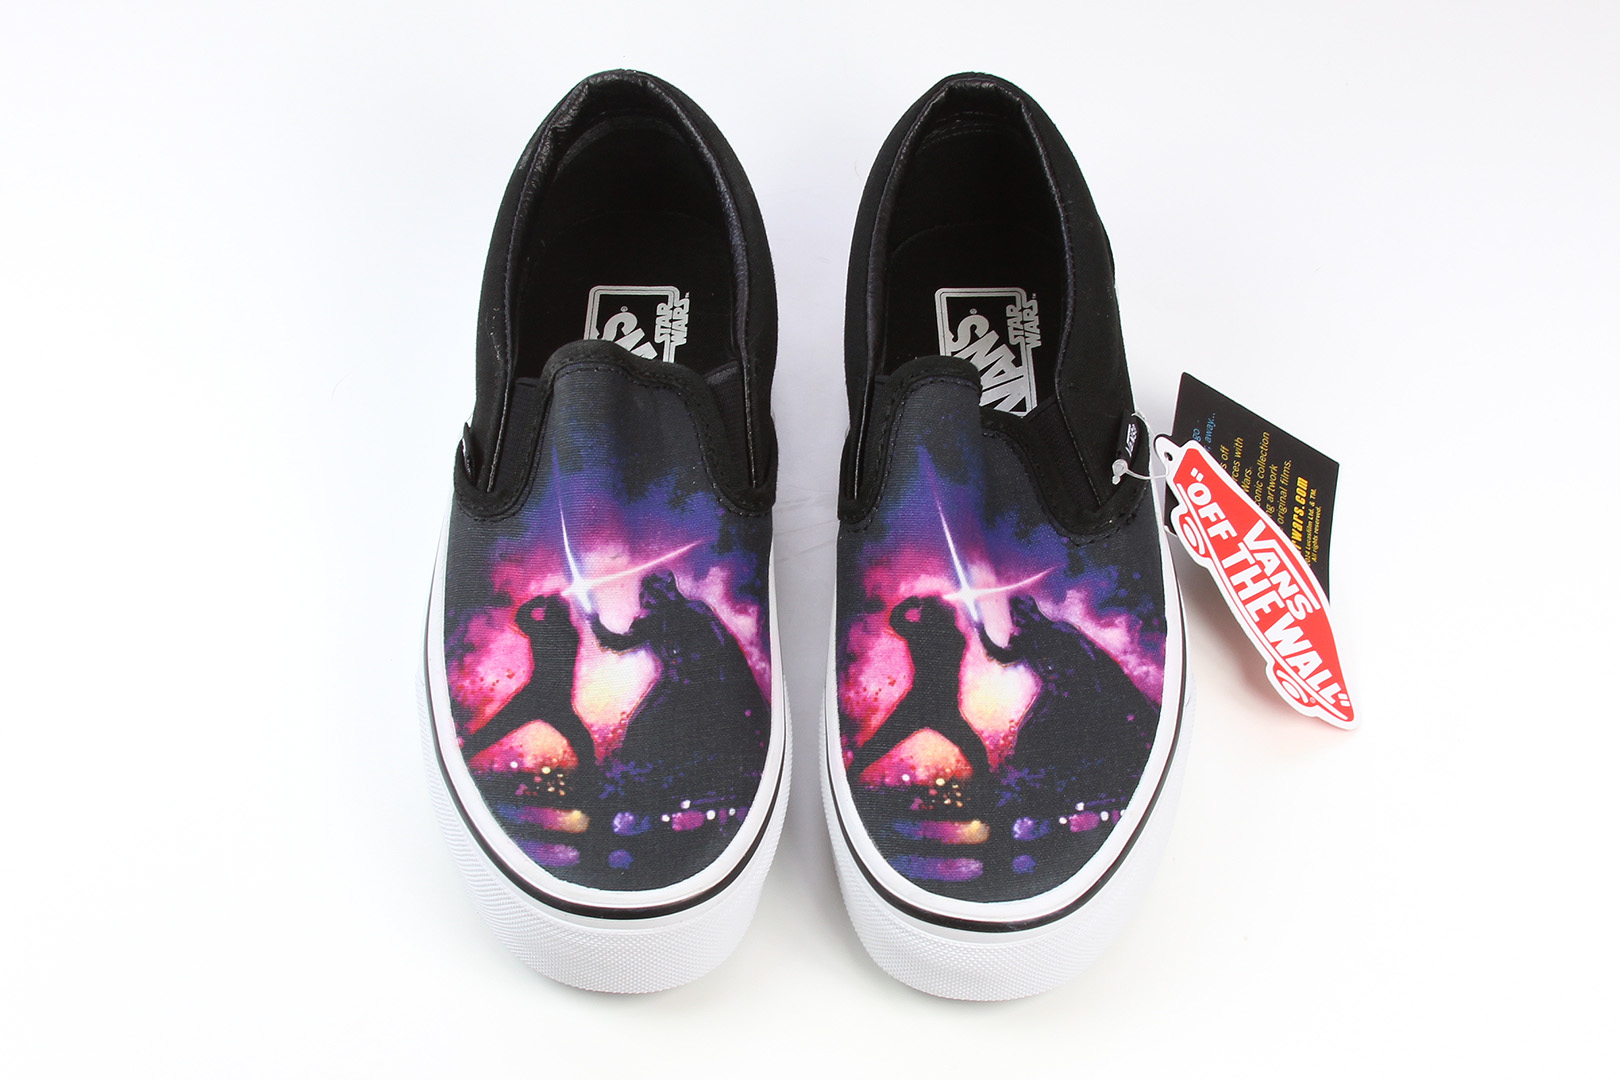 Review - Vans x Star Wars shoes - The 